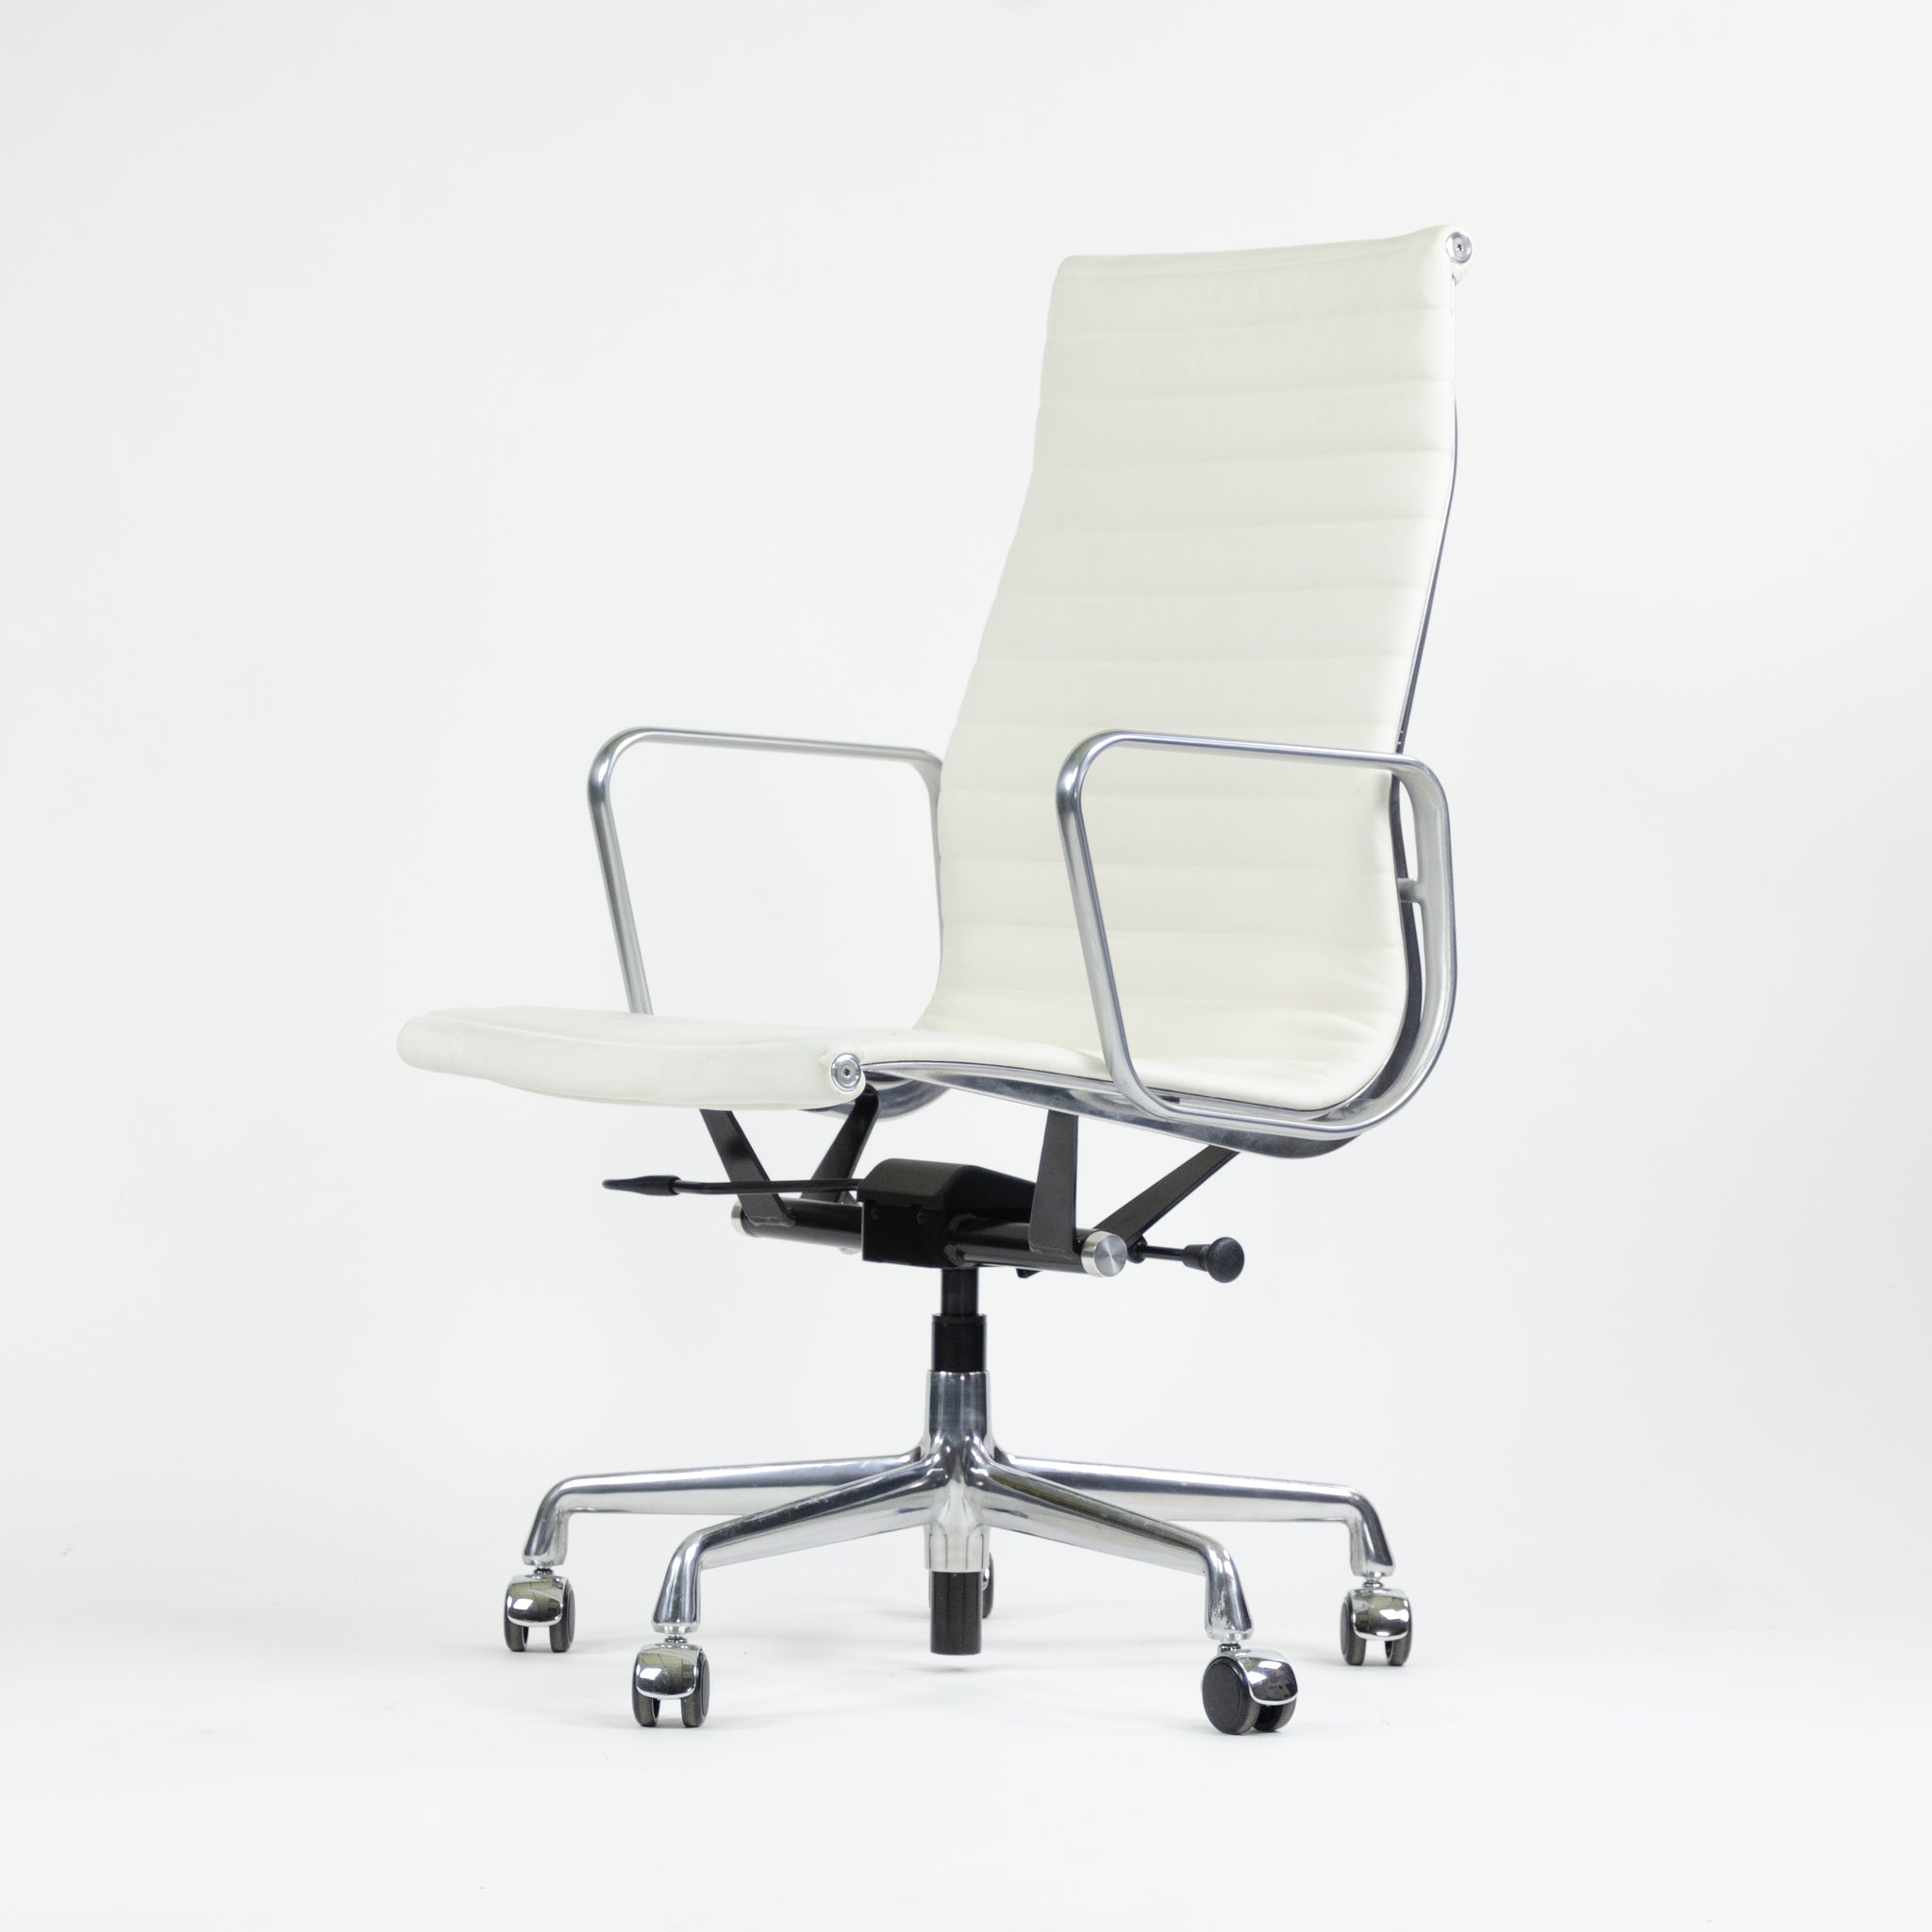 SOLD Eames Herman Miller Leather High Executive Aluminum Group Desk Chair White 2018